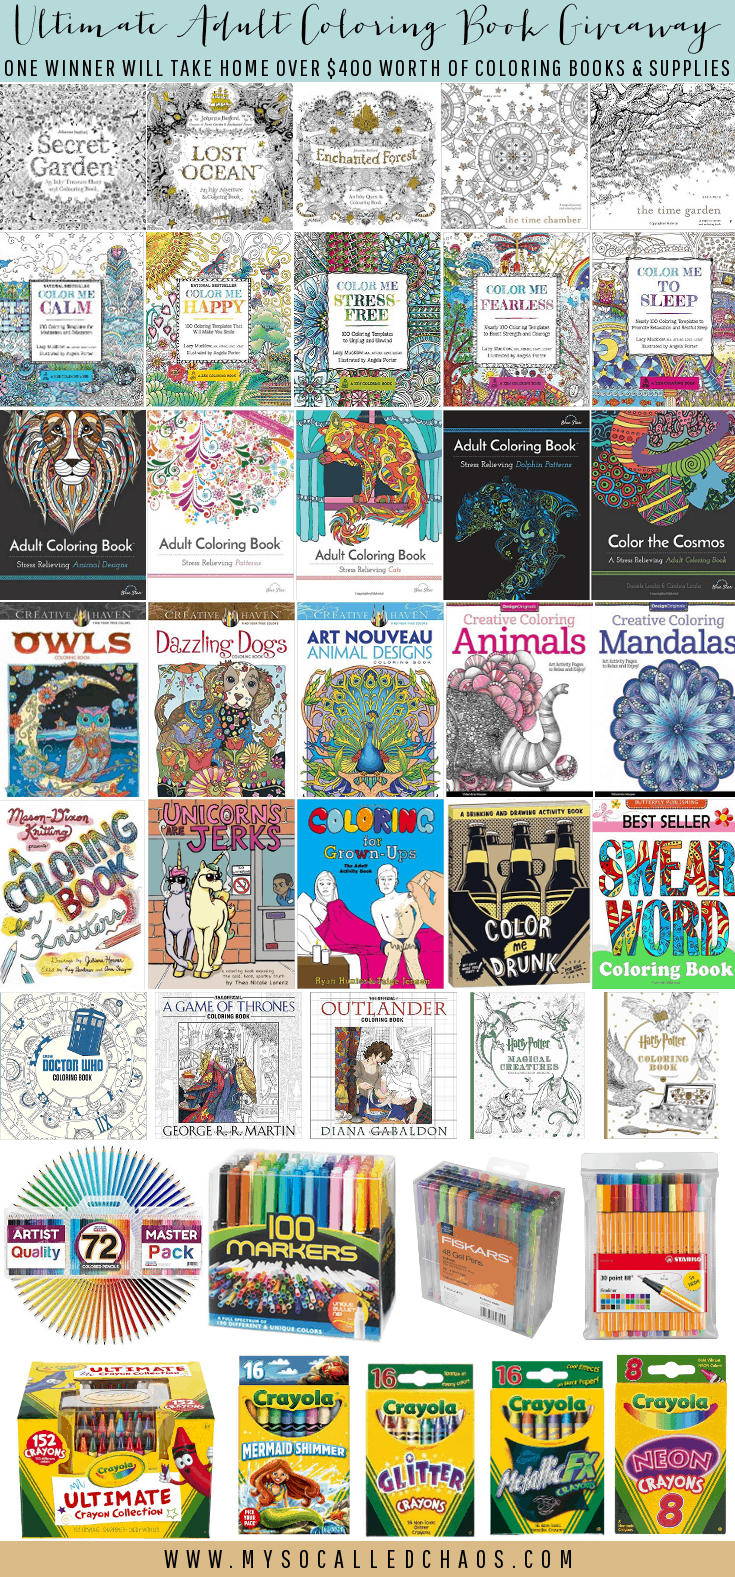 Ultimate Adult Coloring Book Giveaway - Big May Giveaway 2016